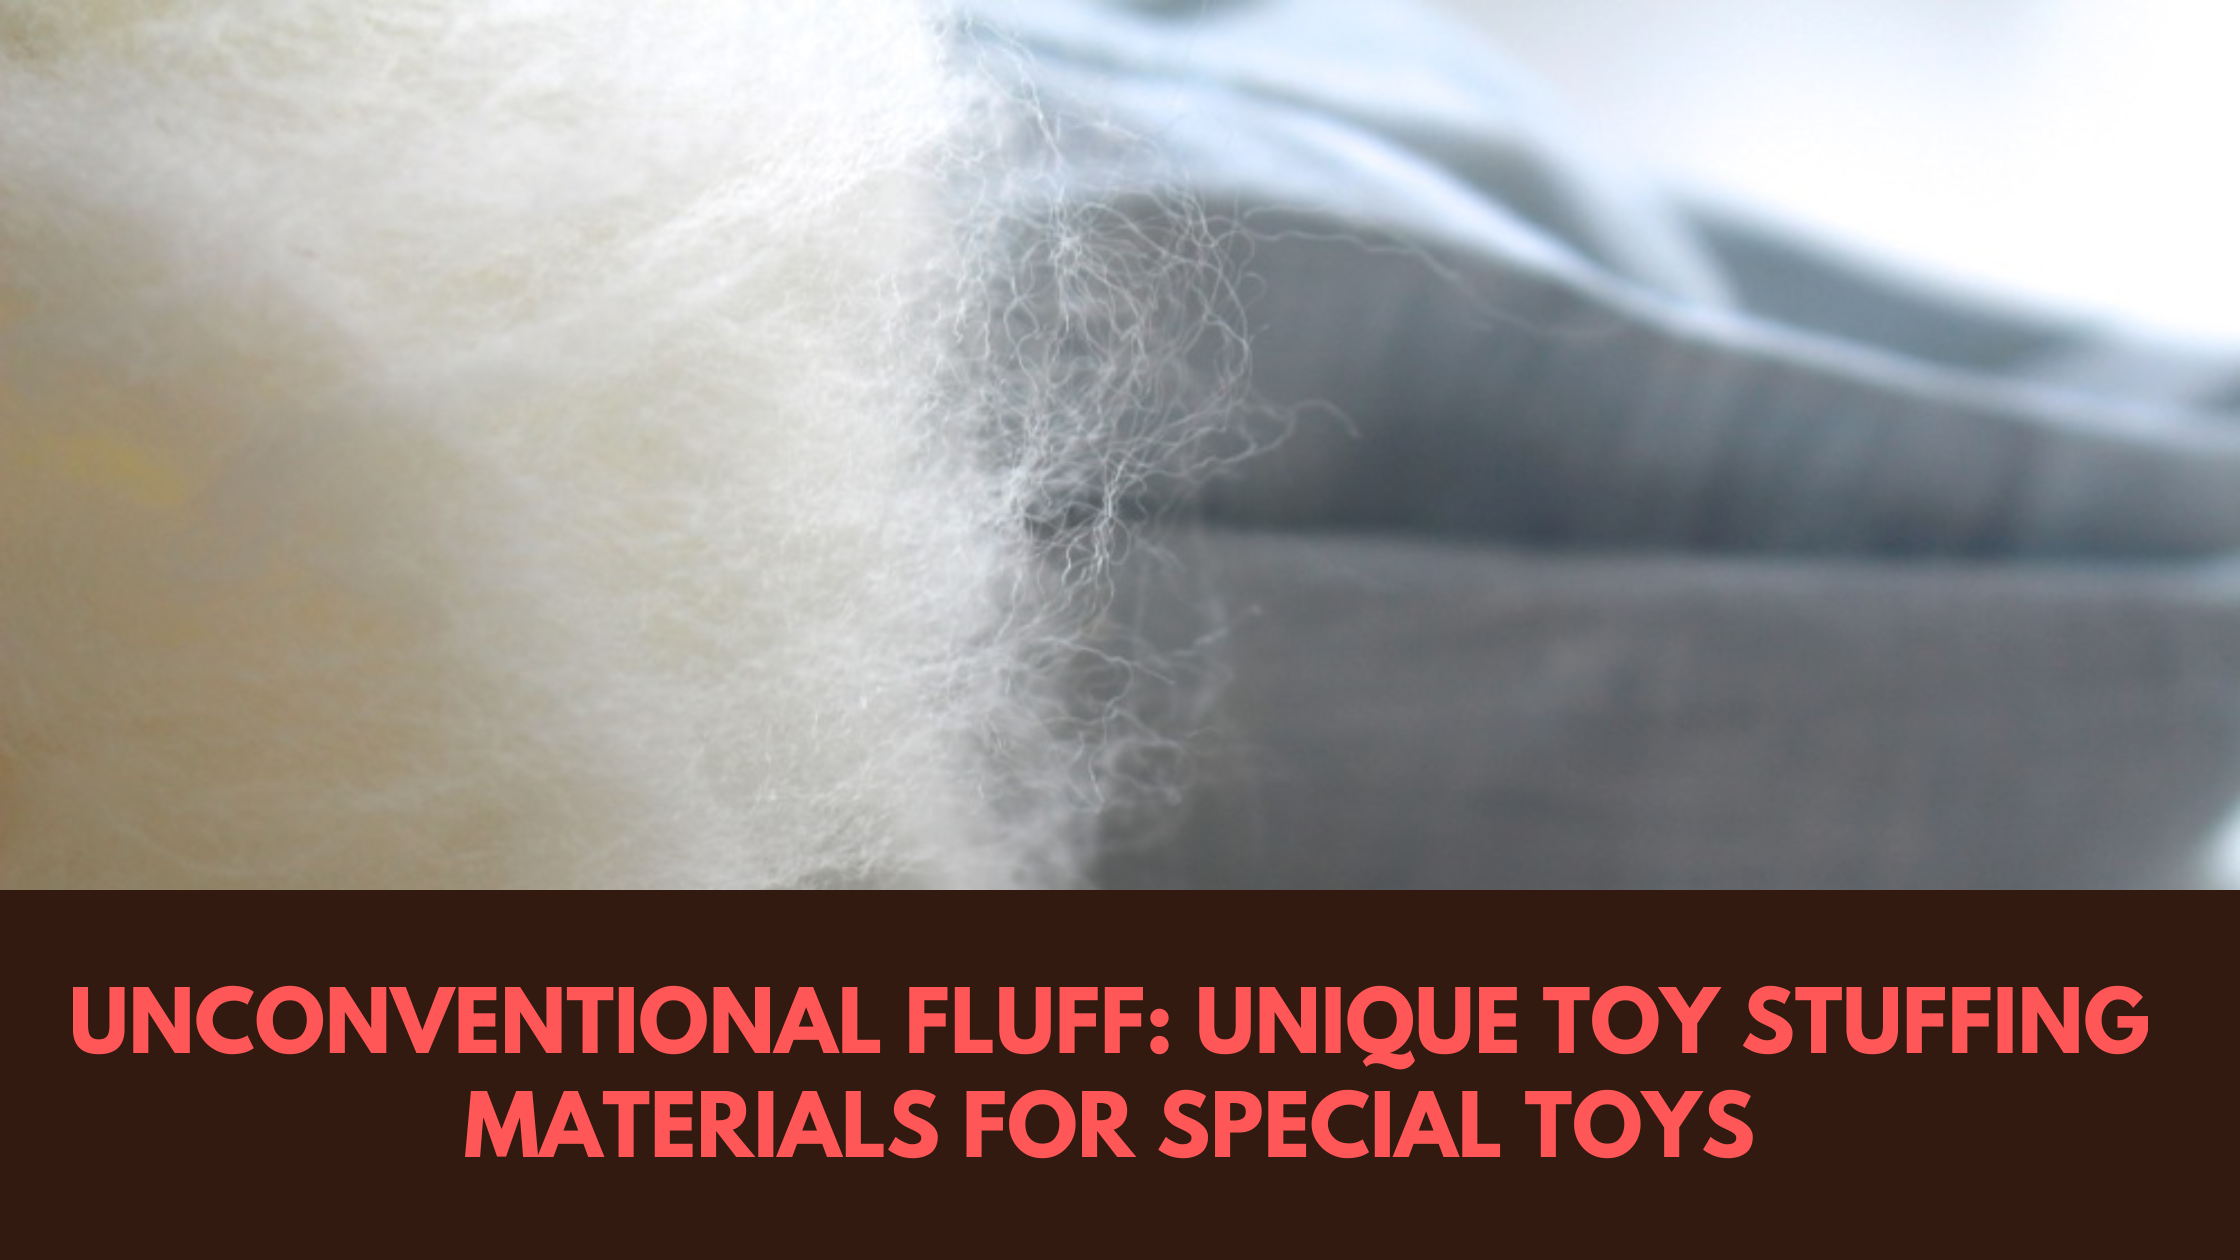 Unconventional Fluff: Unique Toy Stuffing Materials for Special Toys